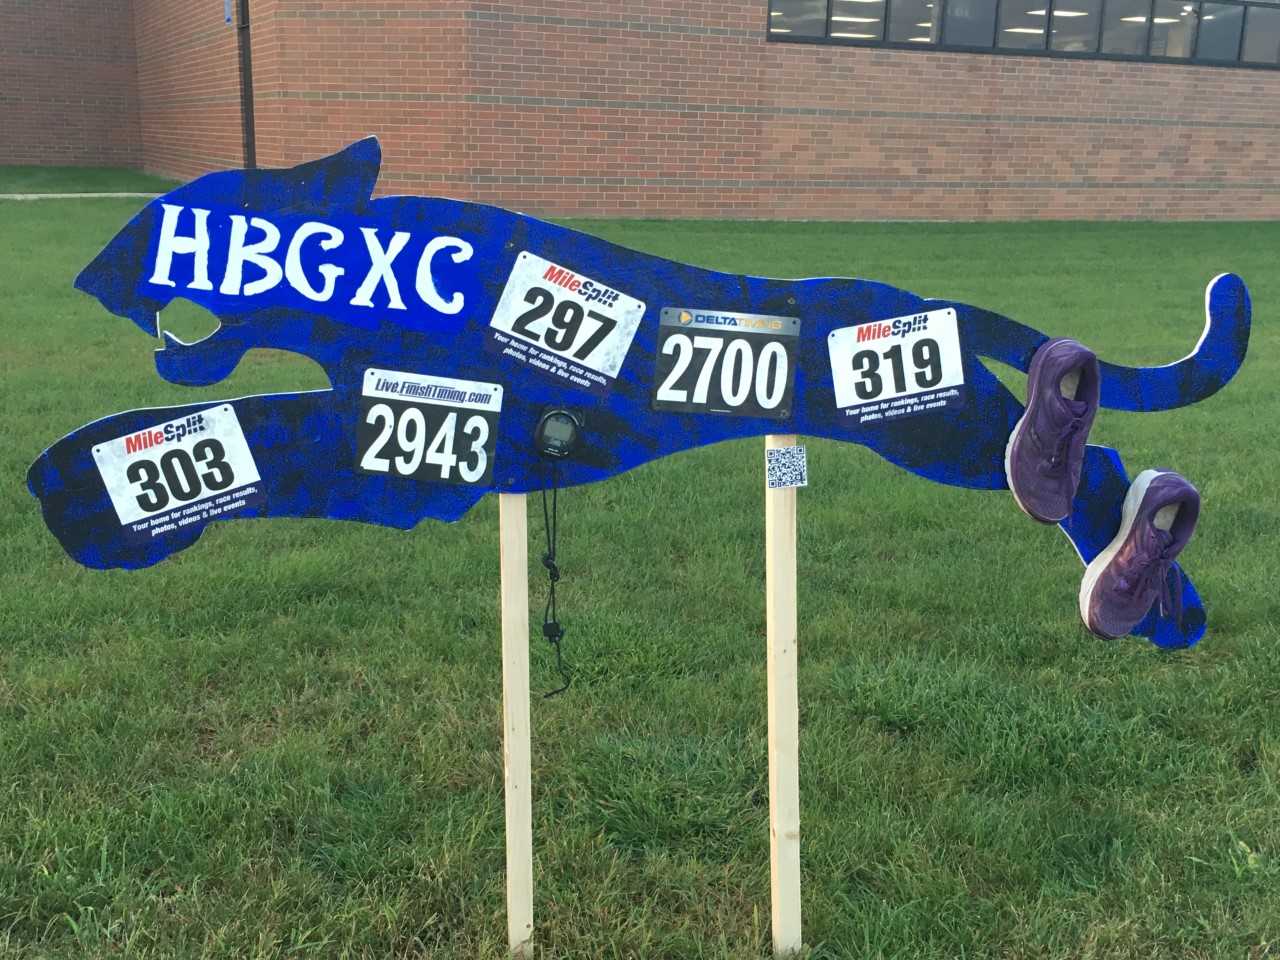 Complete with its own shoes and stopwatch, the Girls XC jag is ready to run.